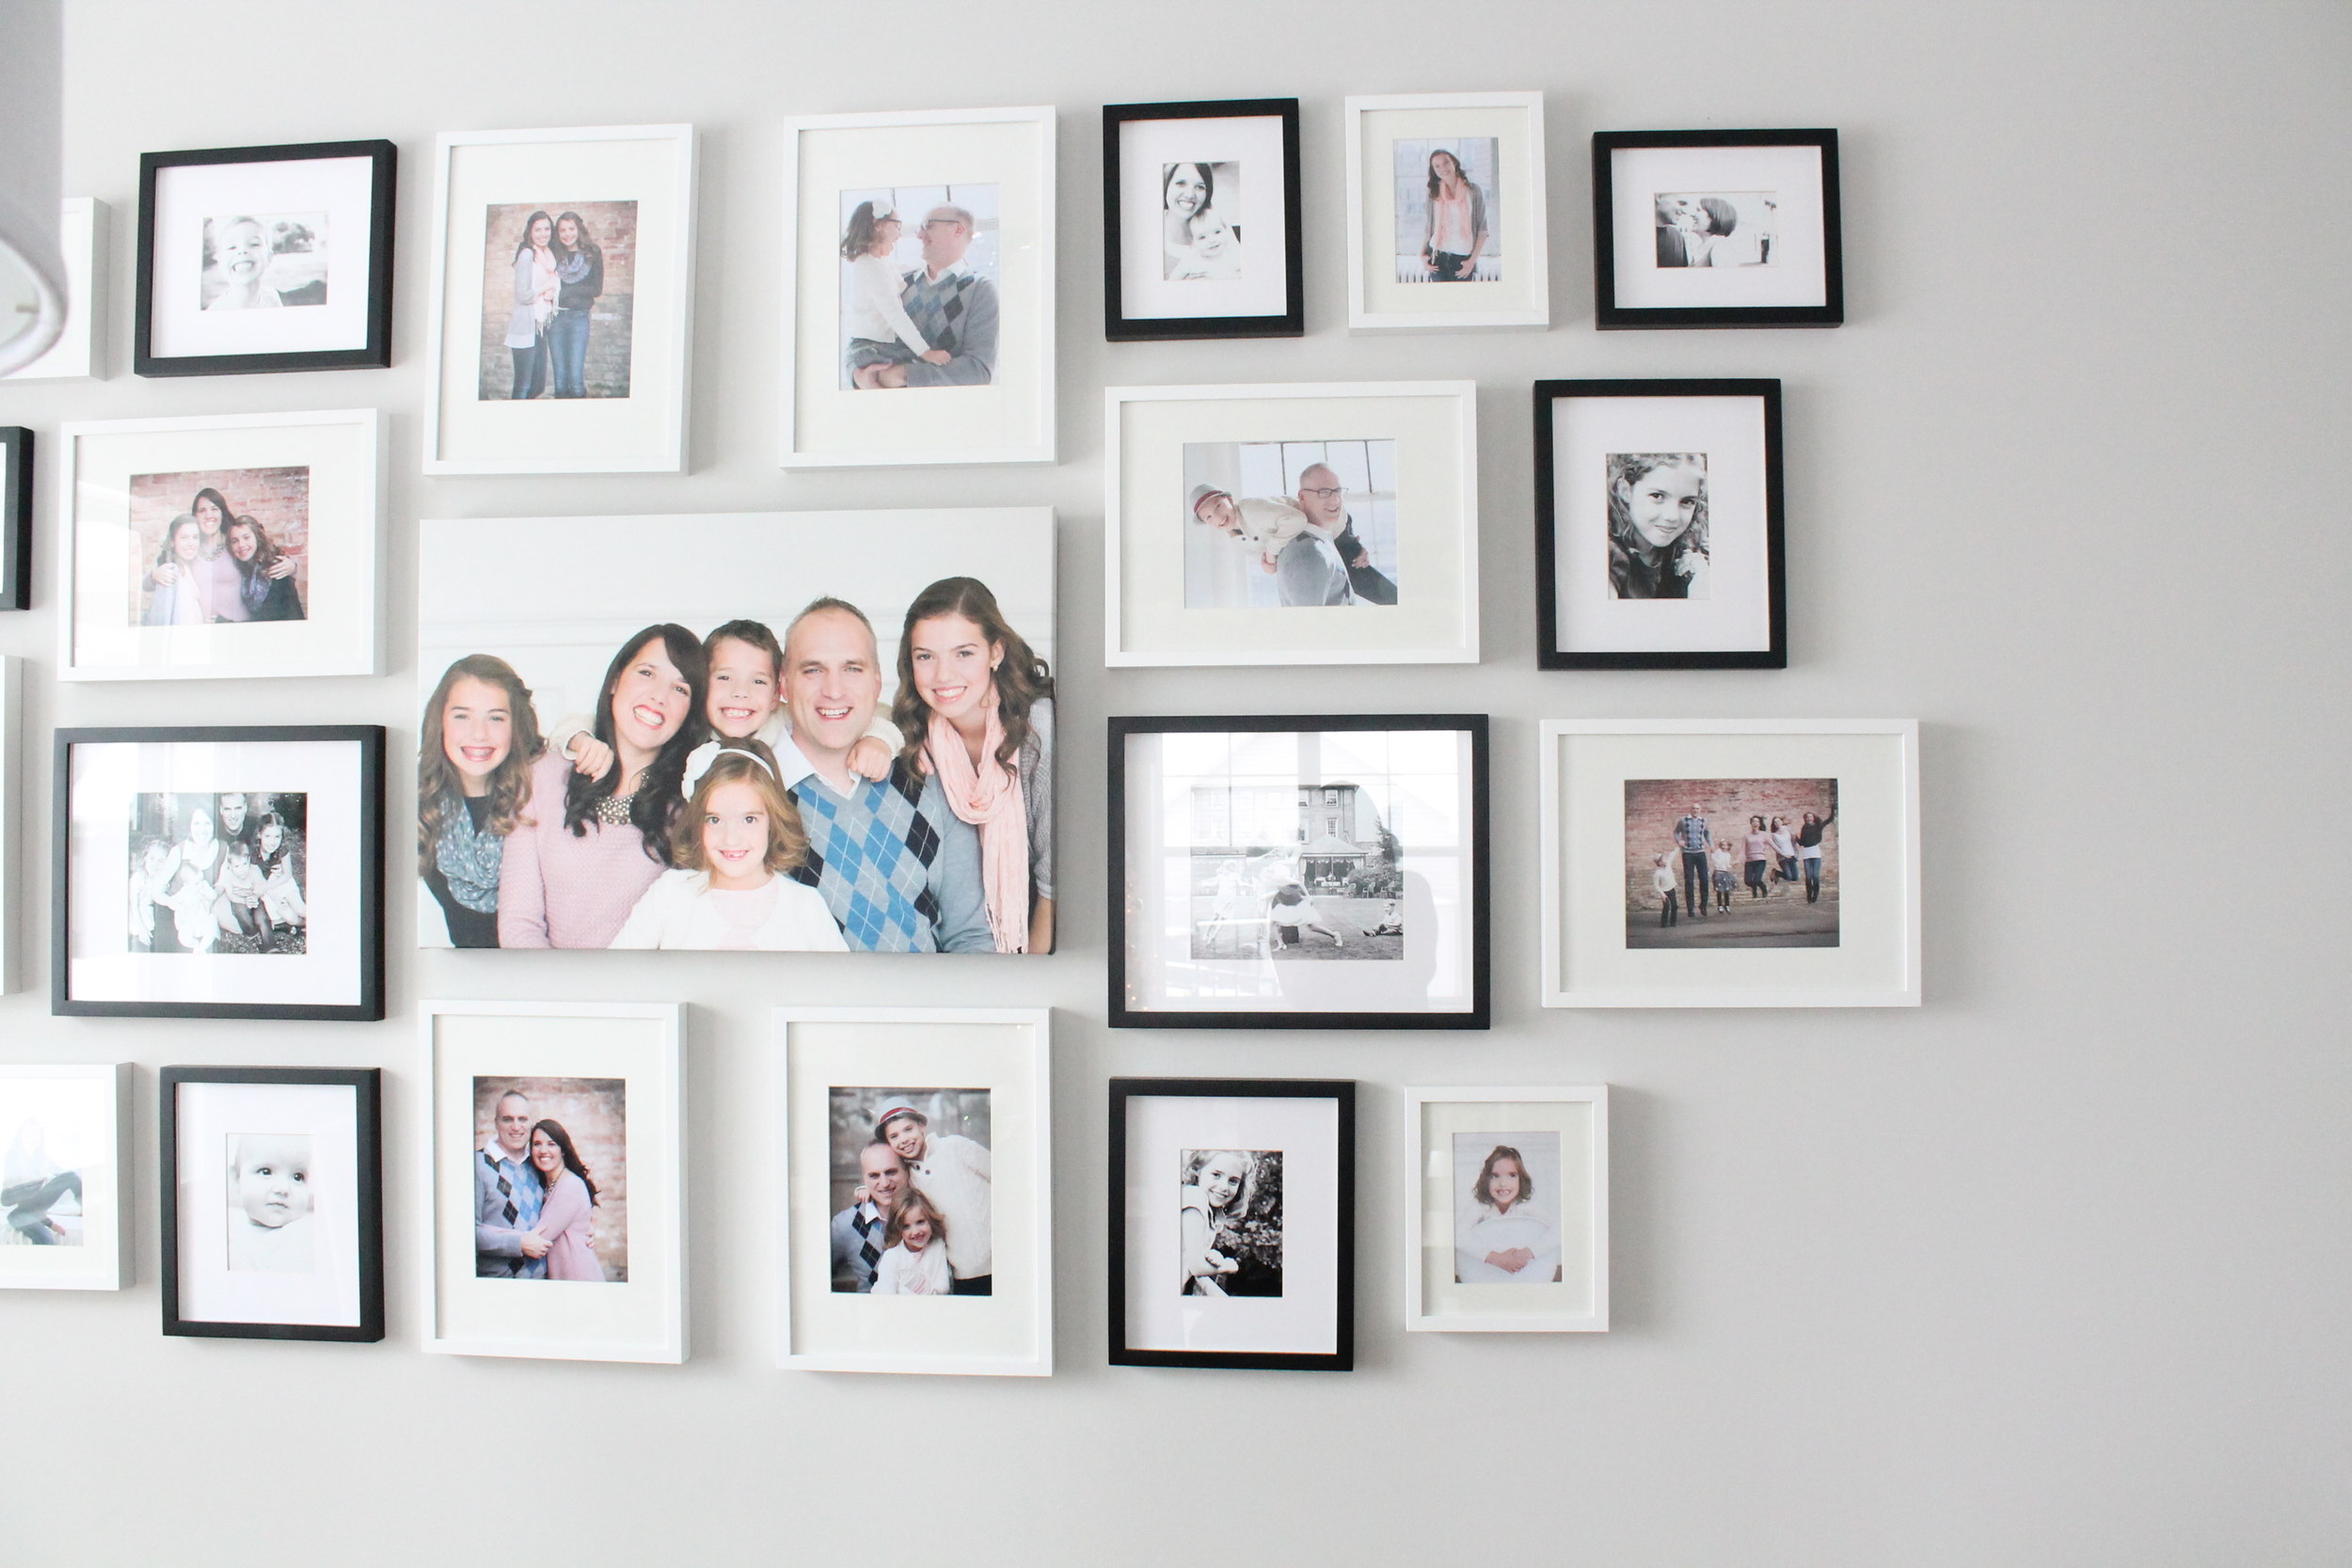 Black and White Photo Gallery Wall